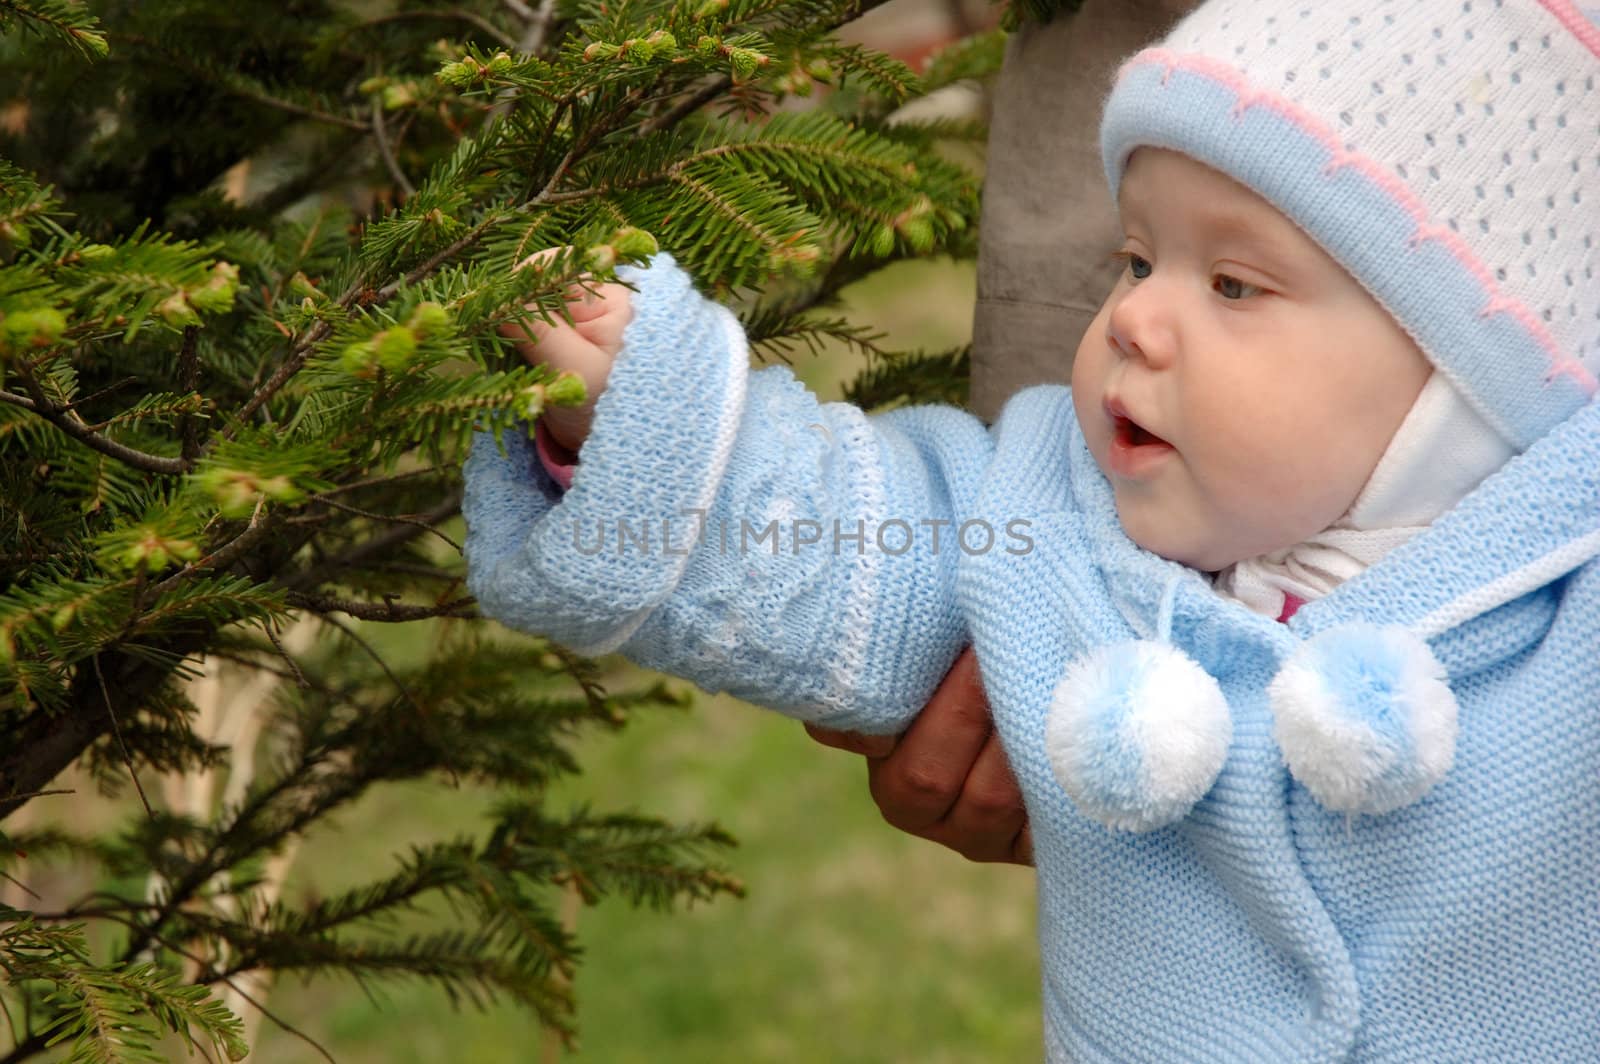 Pretty little girl play with green conifer branchlets.